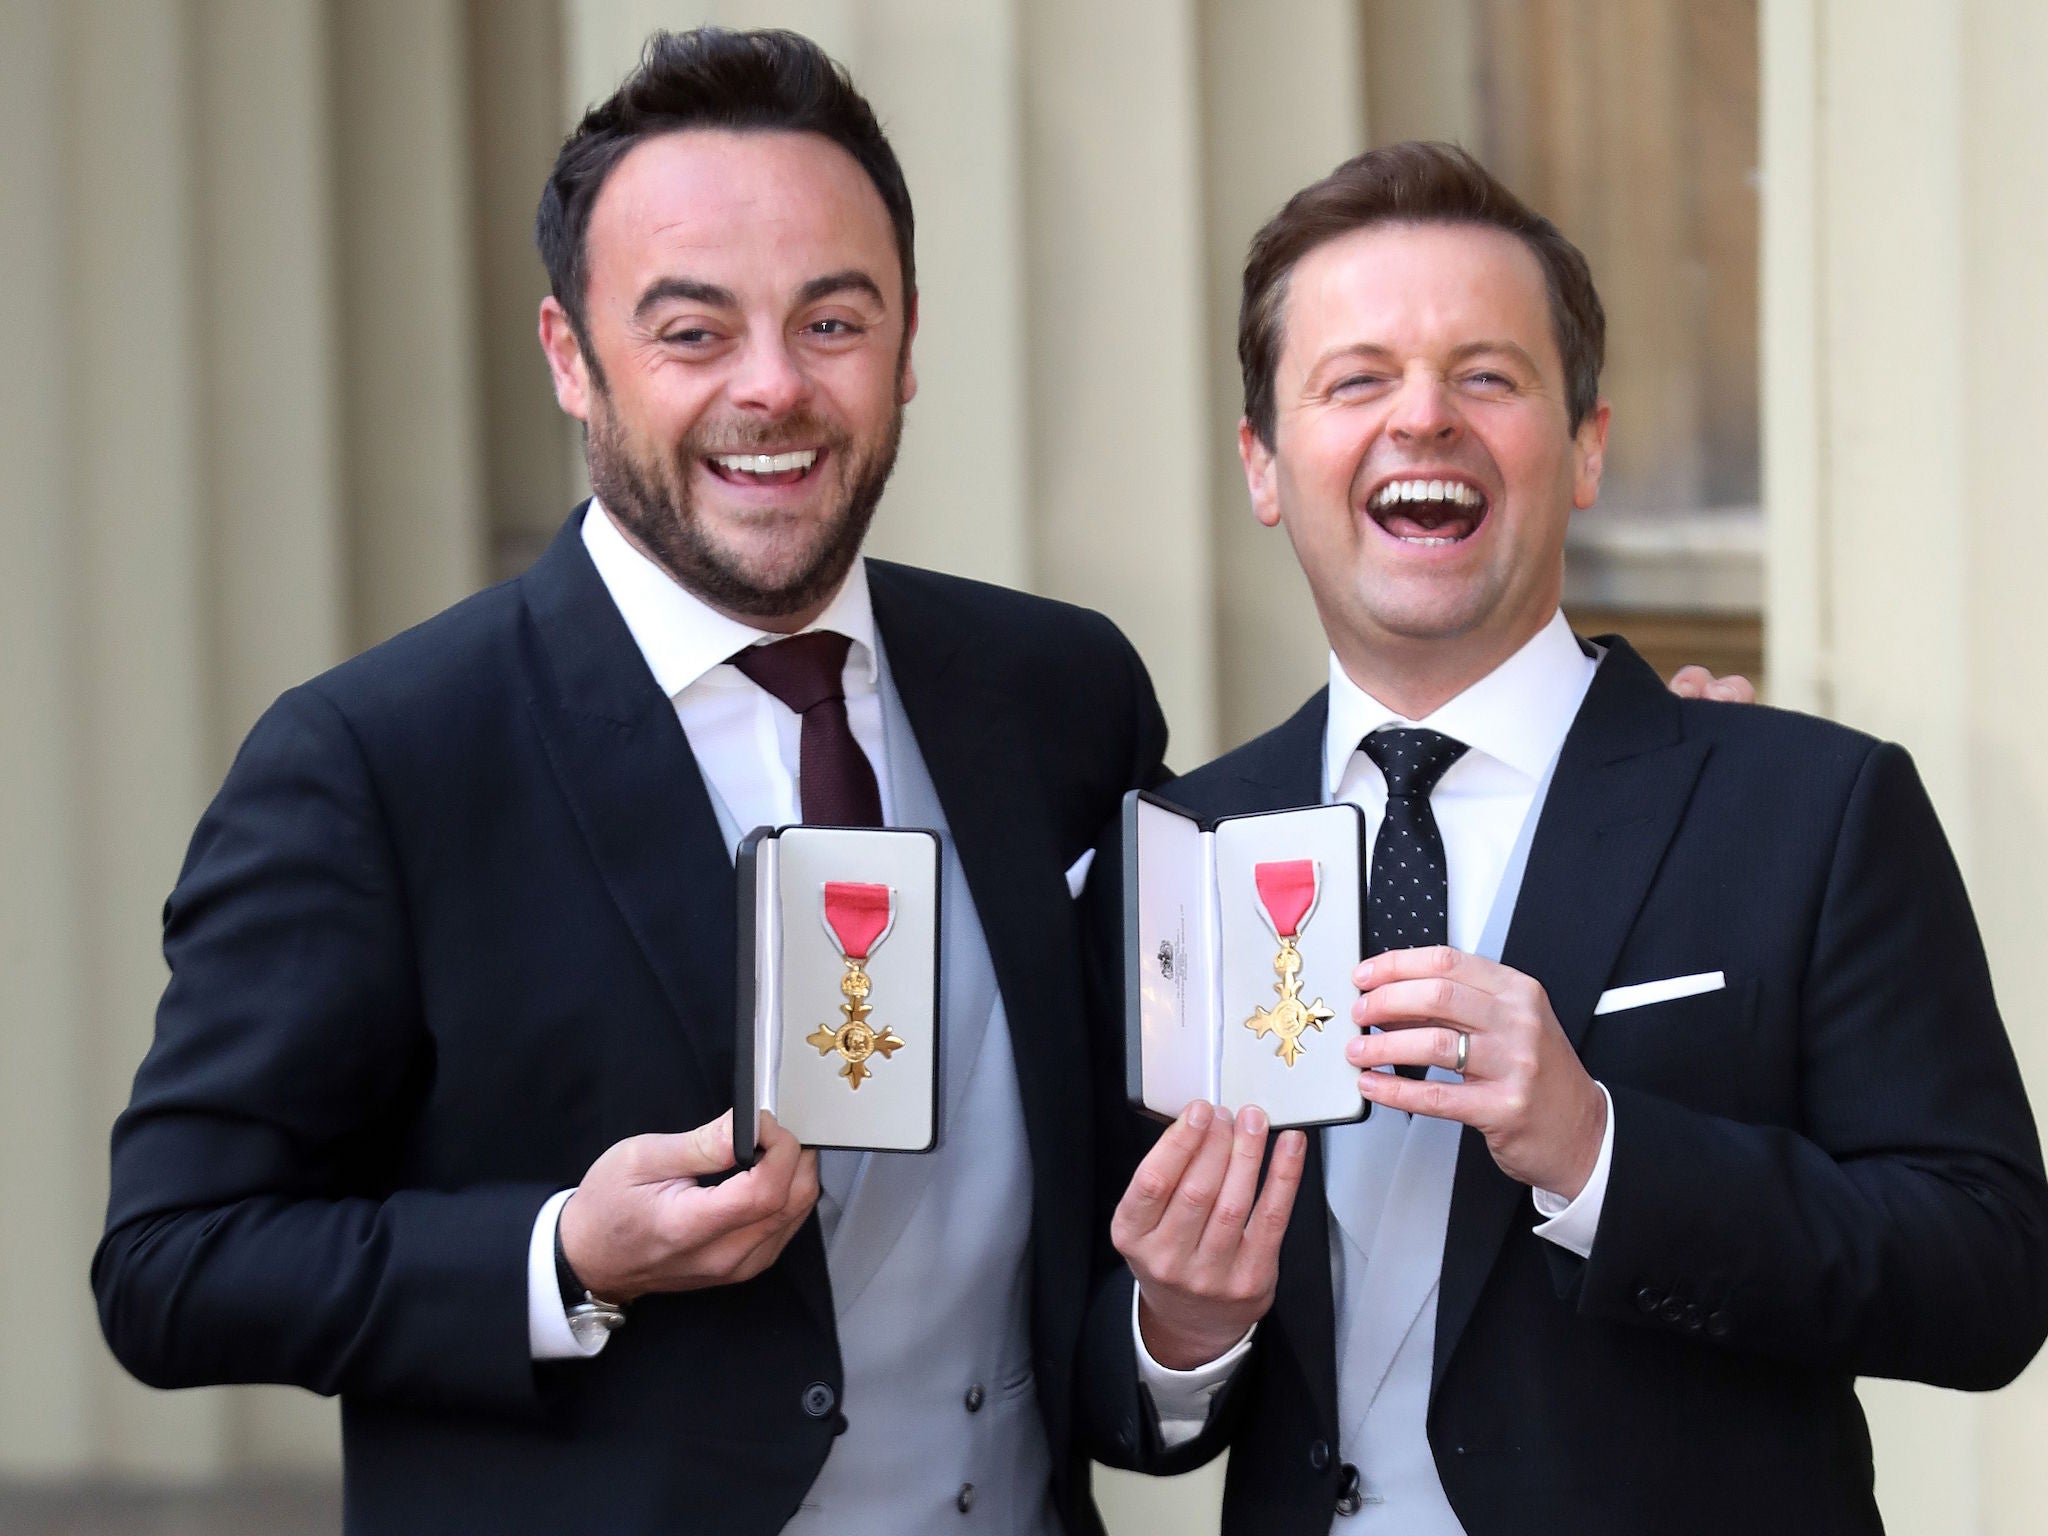 Ant and Dec were appointed OBE by Prince Charles at Buckingham Palace in January 2017